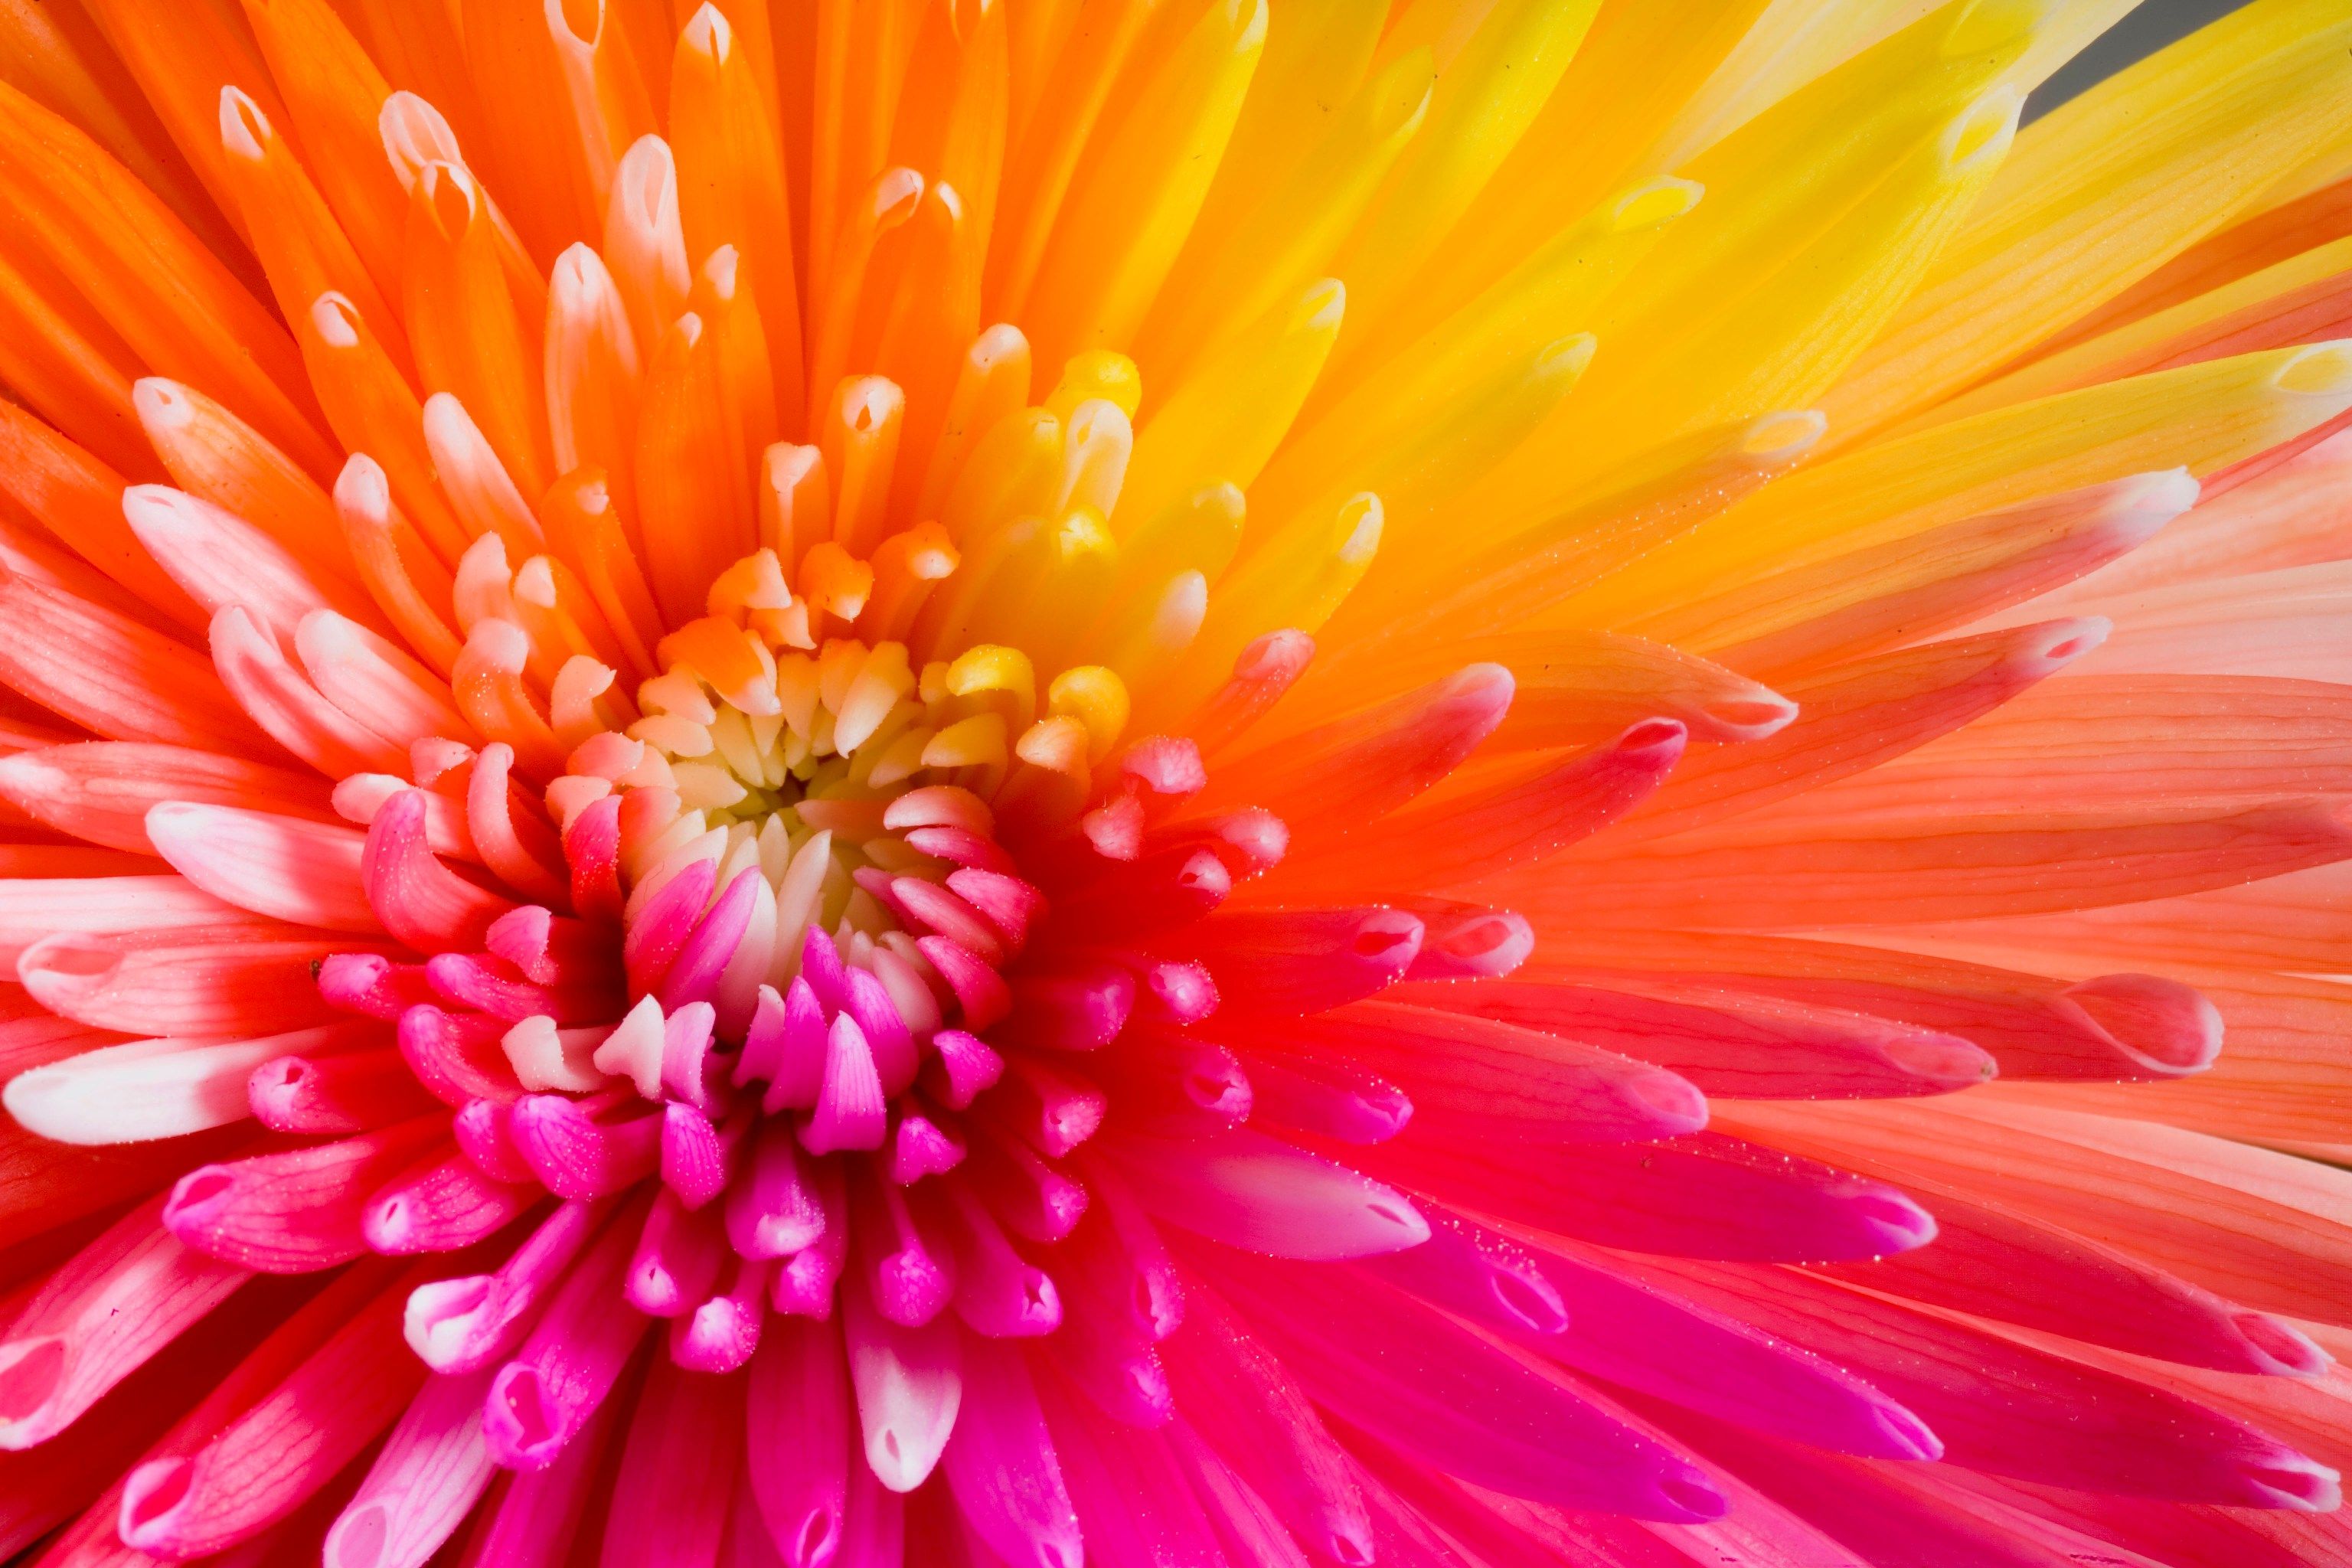 colourful flowers images and wallpapers Download